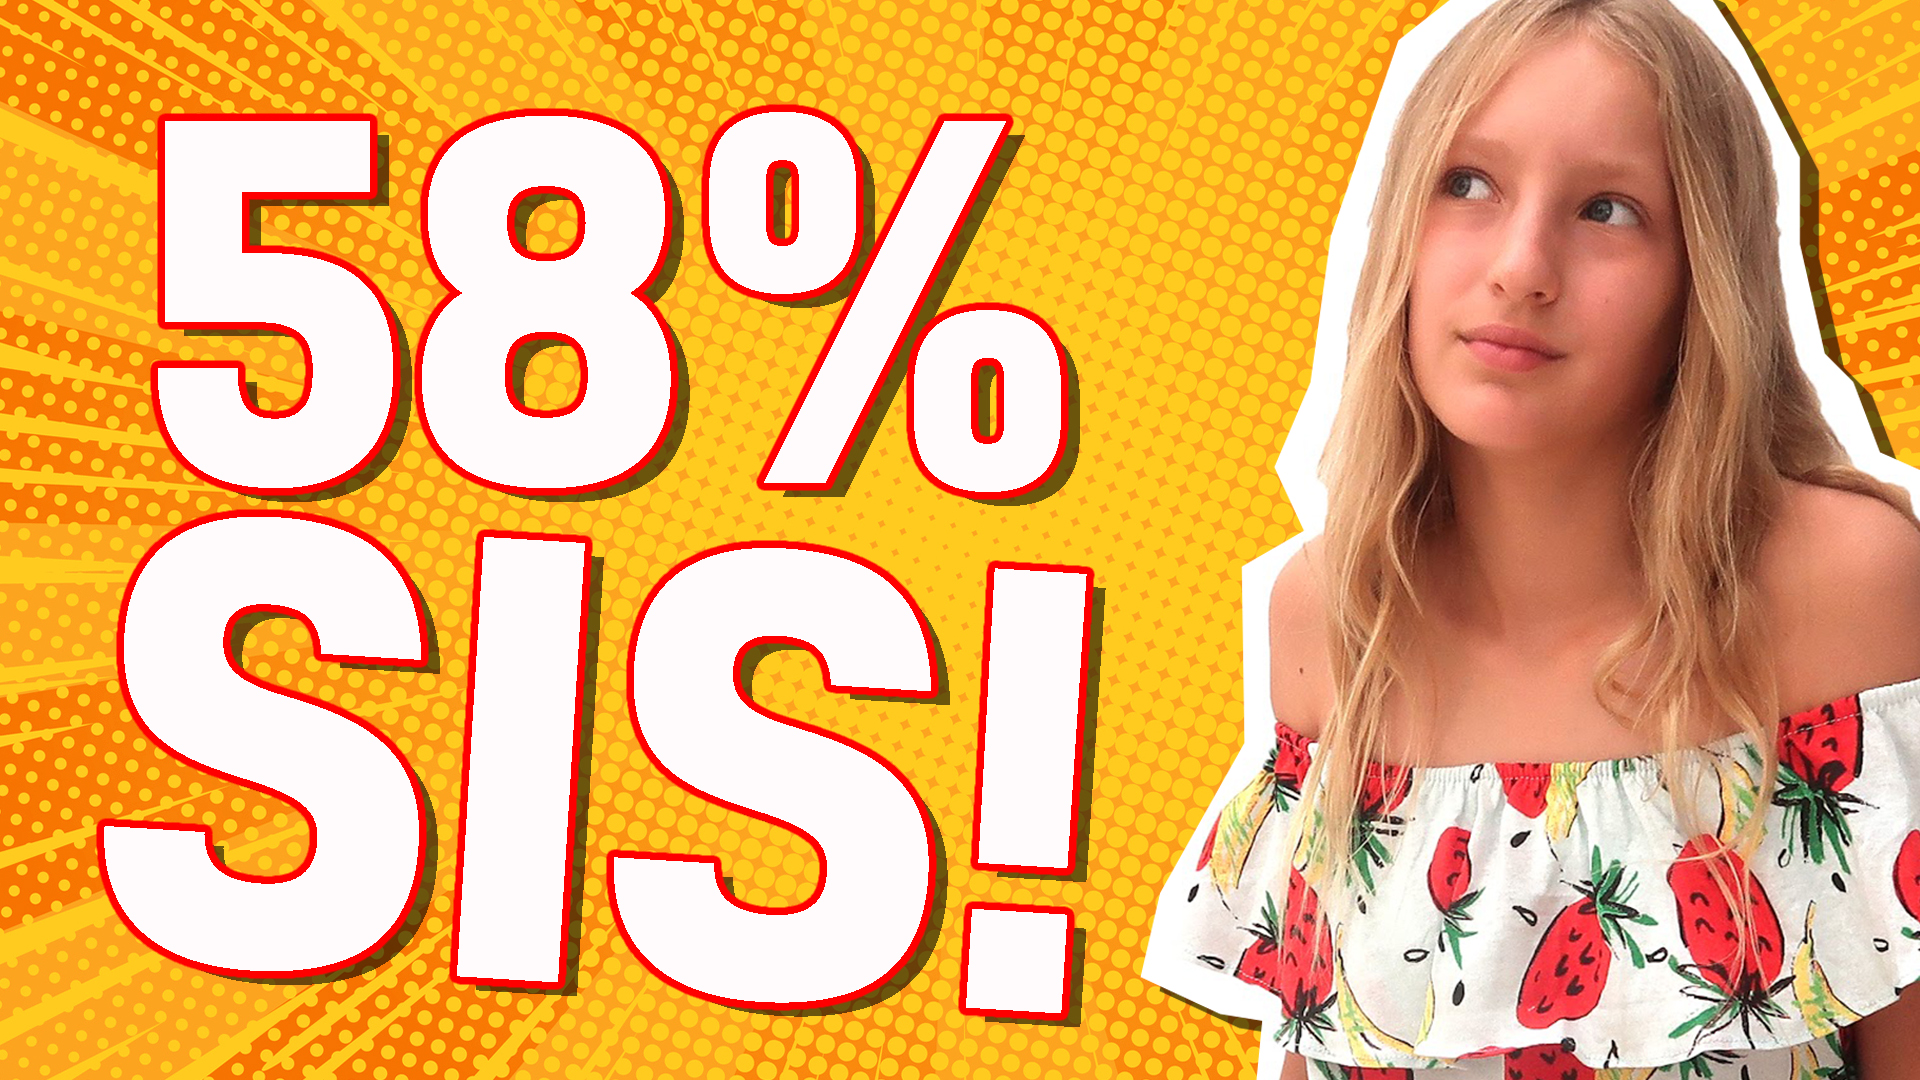 You are: 58% SIS!